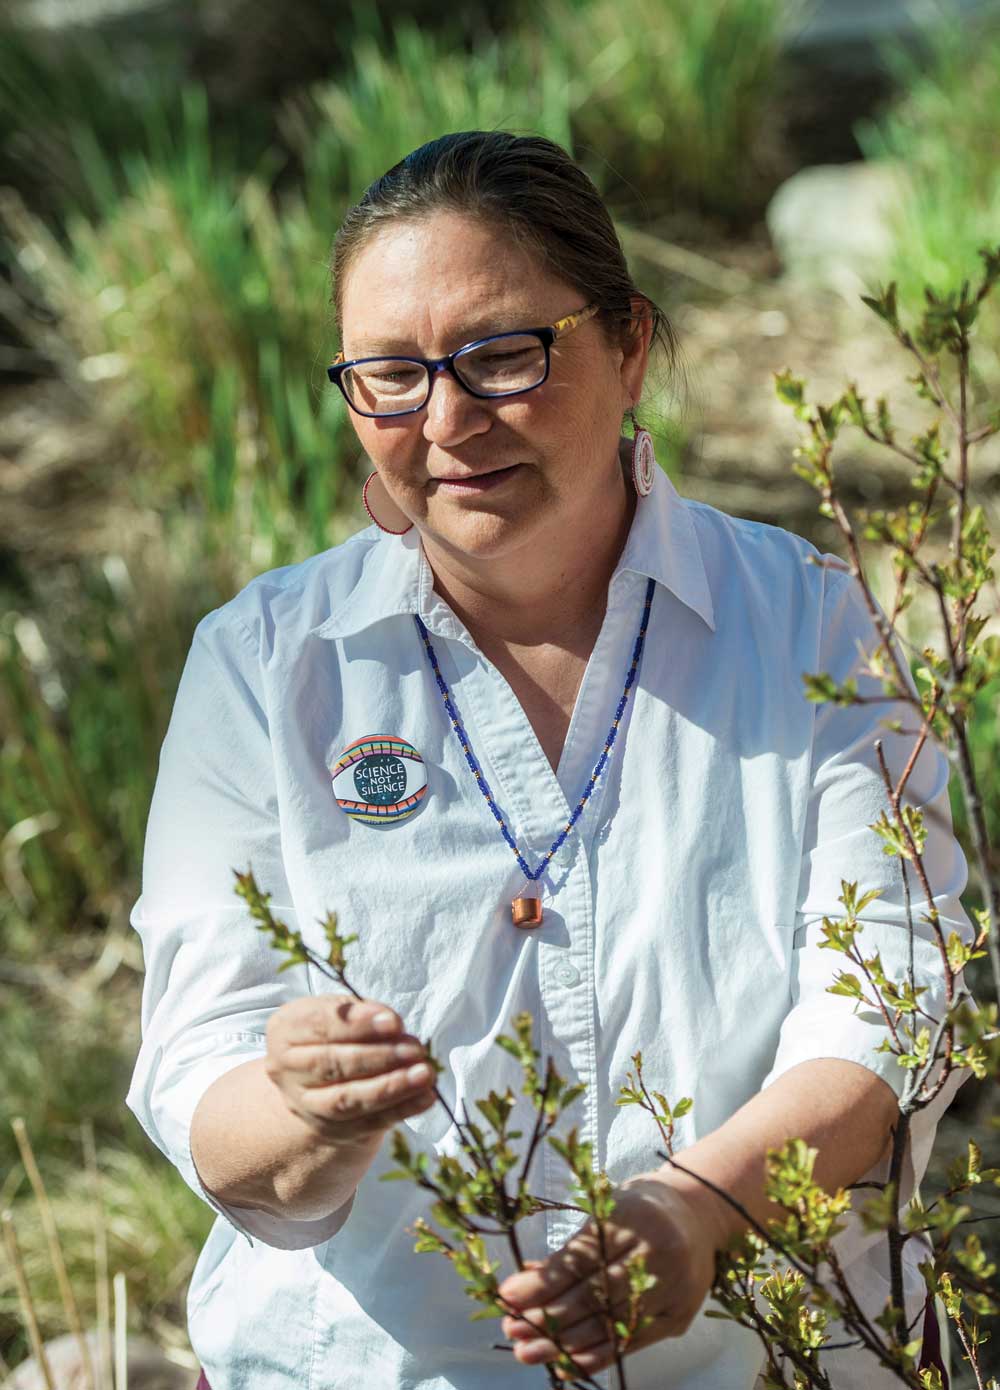 Ethnobotanist Rosalyn LaPier examines the spring buds on a chokecherry bush in the Blackfeet tribal section of the Native American gardens that surround UM’s Payne Family Native American Center.